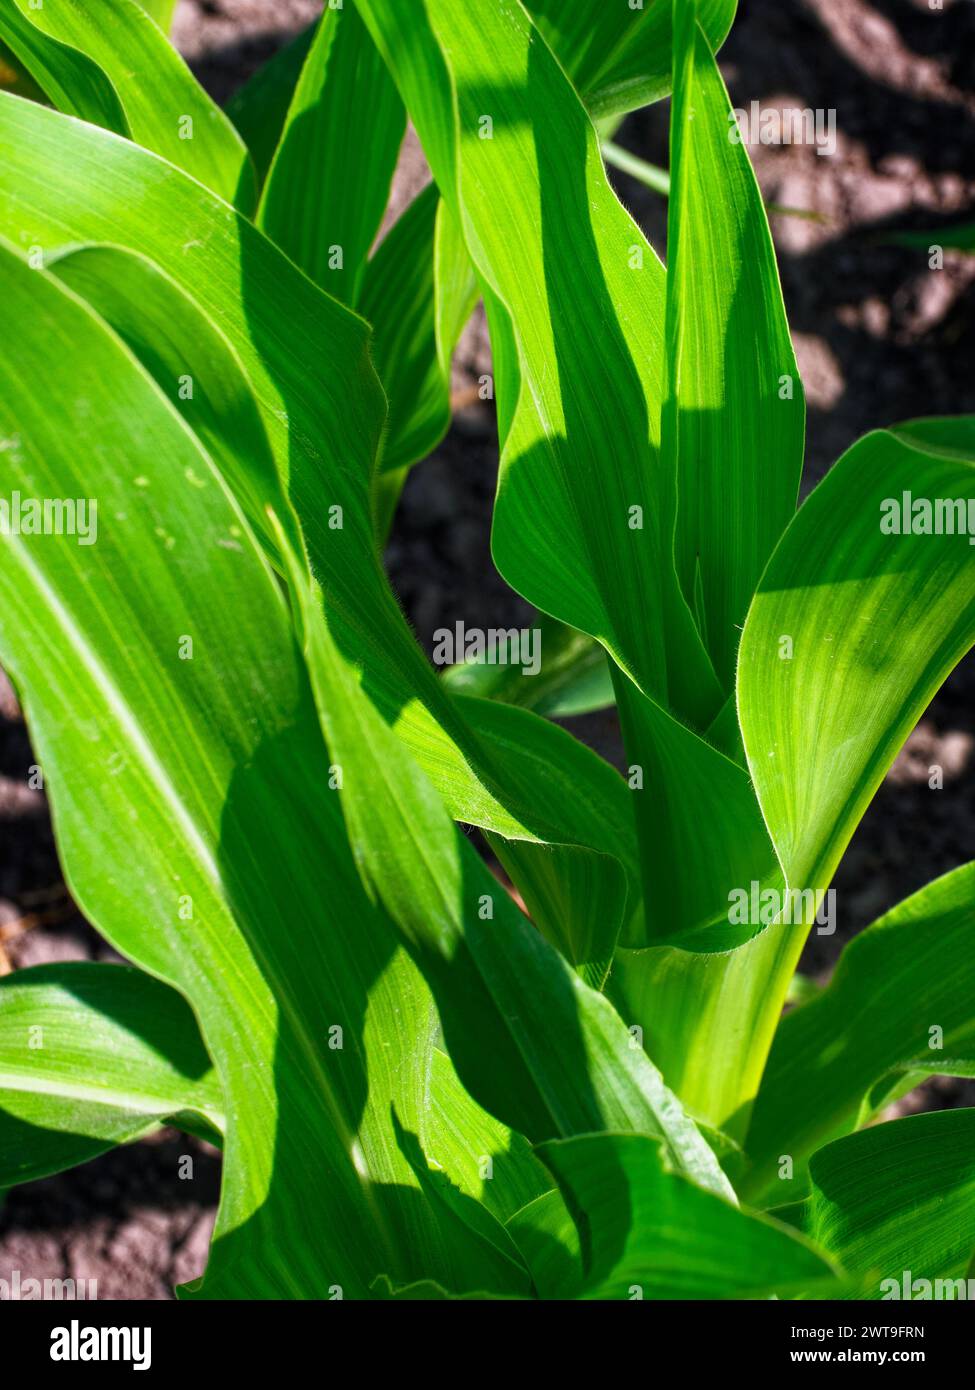 Sunlit Cornfield: Close-up of vibrant green corn leaves, illuminated by sunlight, showcasing natural patterns and textures. Stock Photo